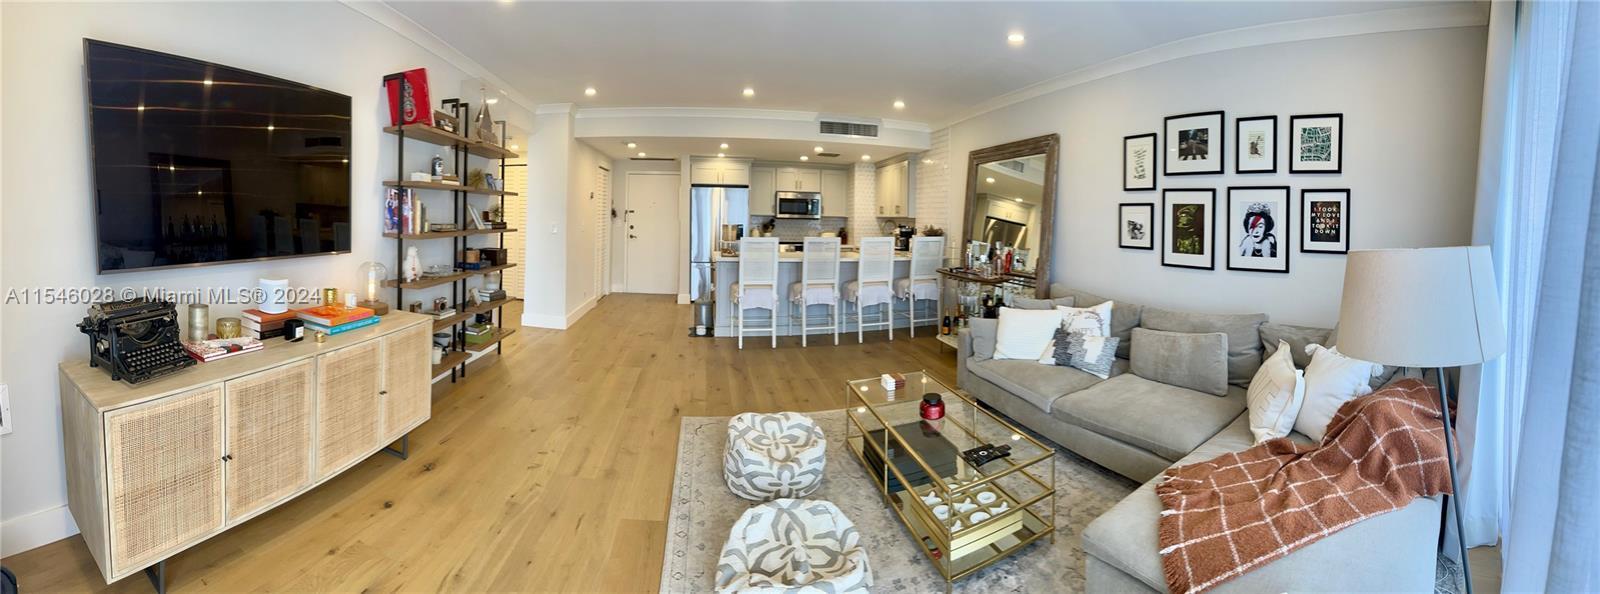 Top of the line exceptional remodeled 1/1 Brickell Beauty! No expense spared; hardwood floors, open 